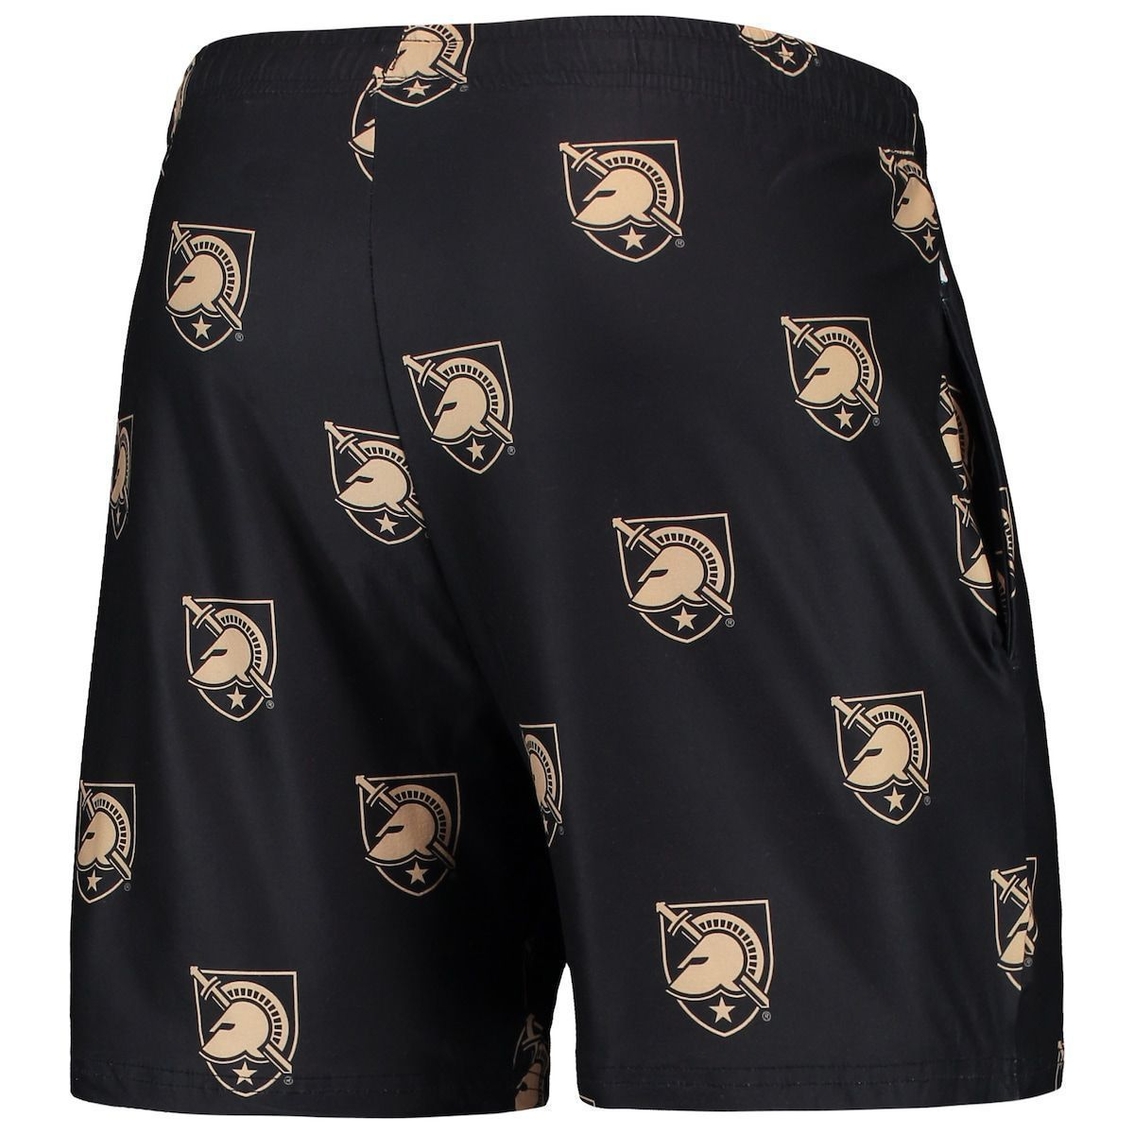 Concepts Sport Men's Black Army Black Knights Flagship Allover Print Jam Shorts - Image 4 of 4